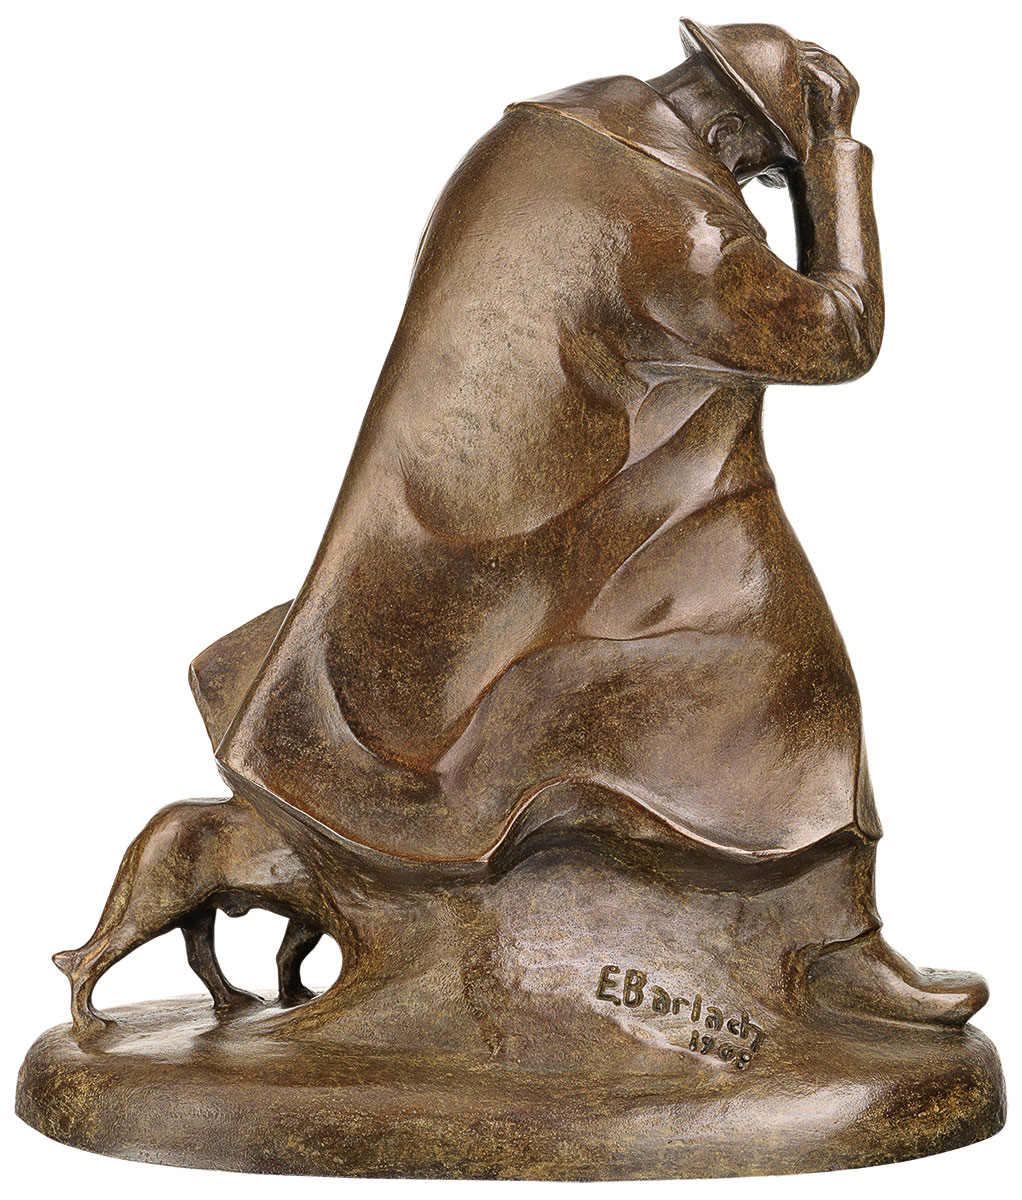 Sculpture "Shepherd in a Storm" (1908), reduction in bronze by Ernst Barlach